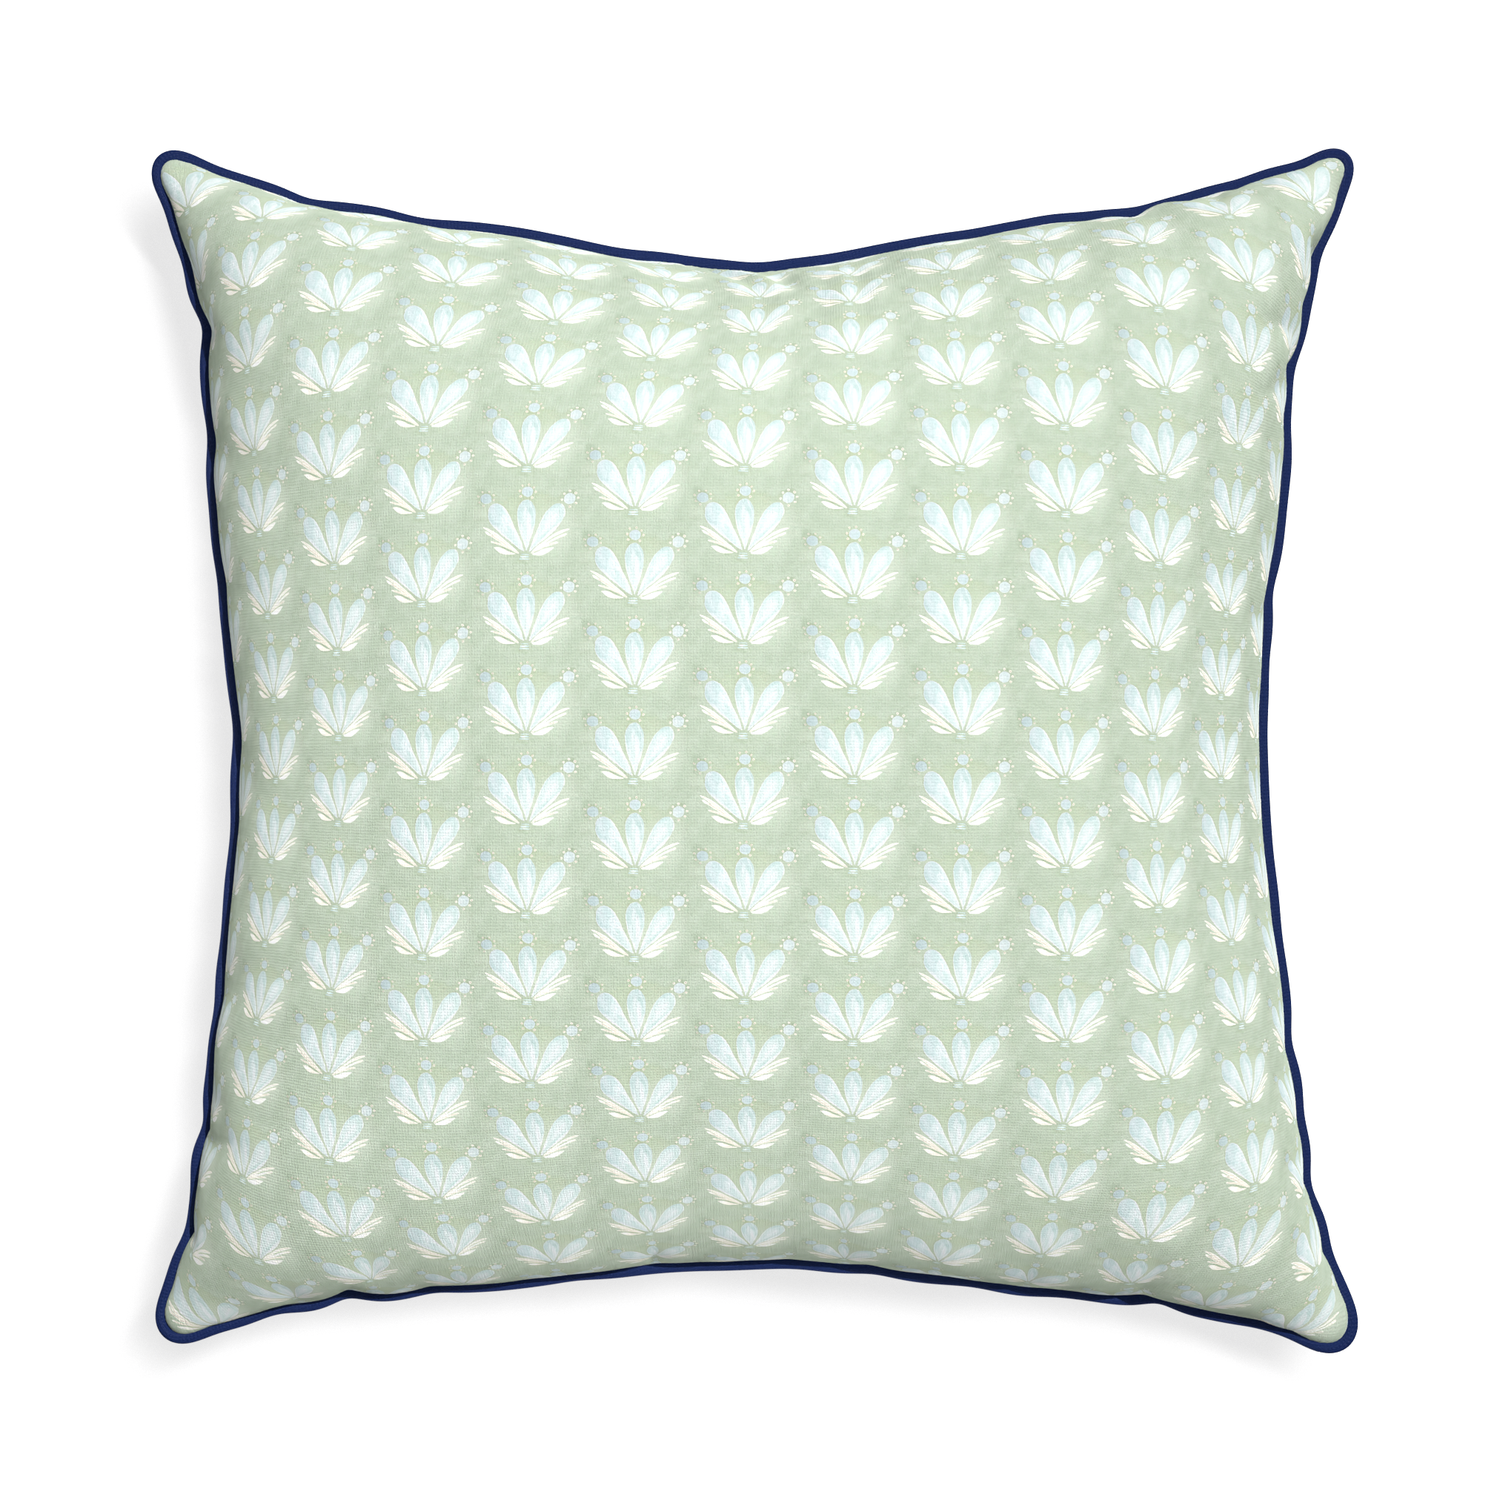 Euro-sham serena sea salt custom blue & green floral drop repeatpillow with midnight piping on white background